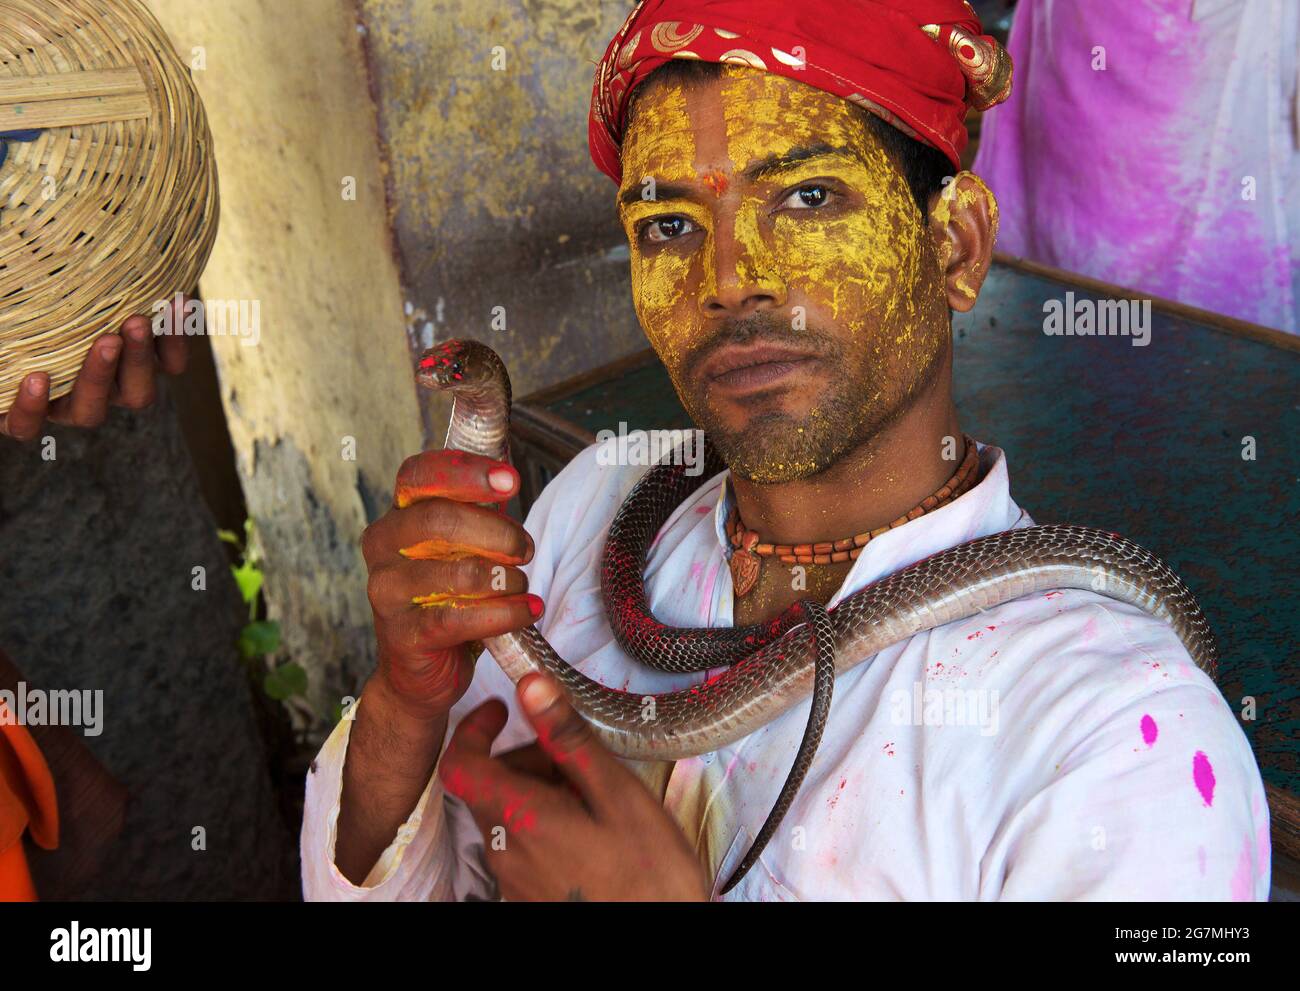 A priest of the Krishna Temple of Shriji, during Lathmar Holi, plays with a snake charmer freind's snake and blesses it with pink powder for Holi. The Stock Photo